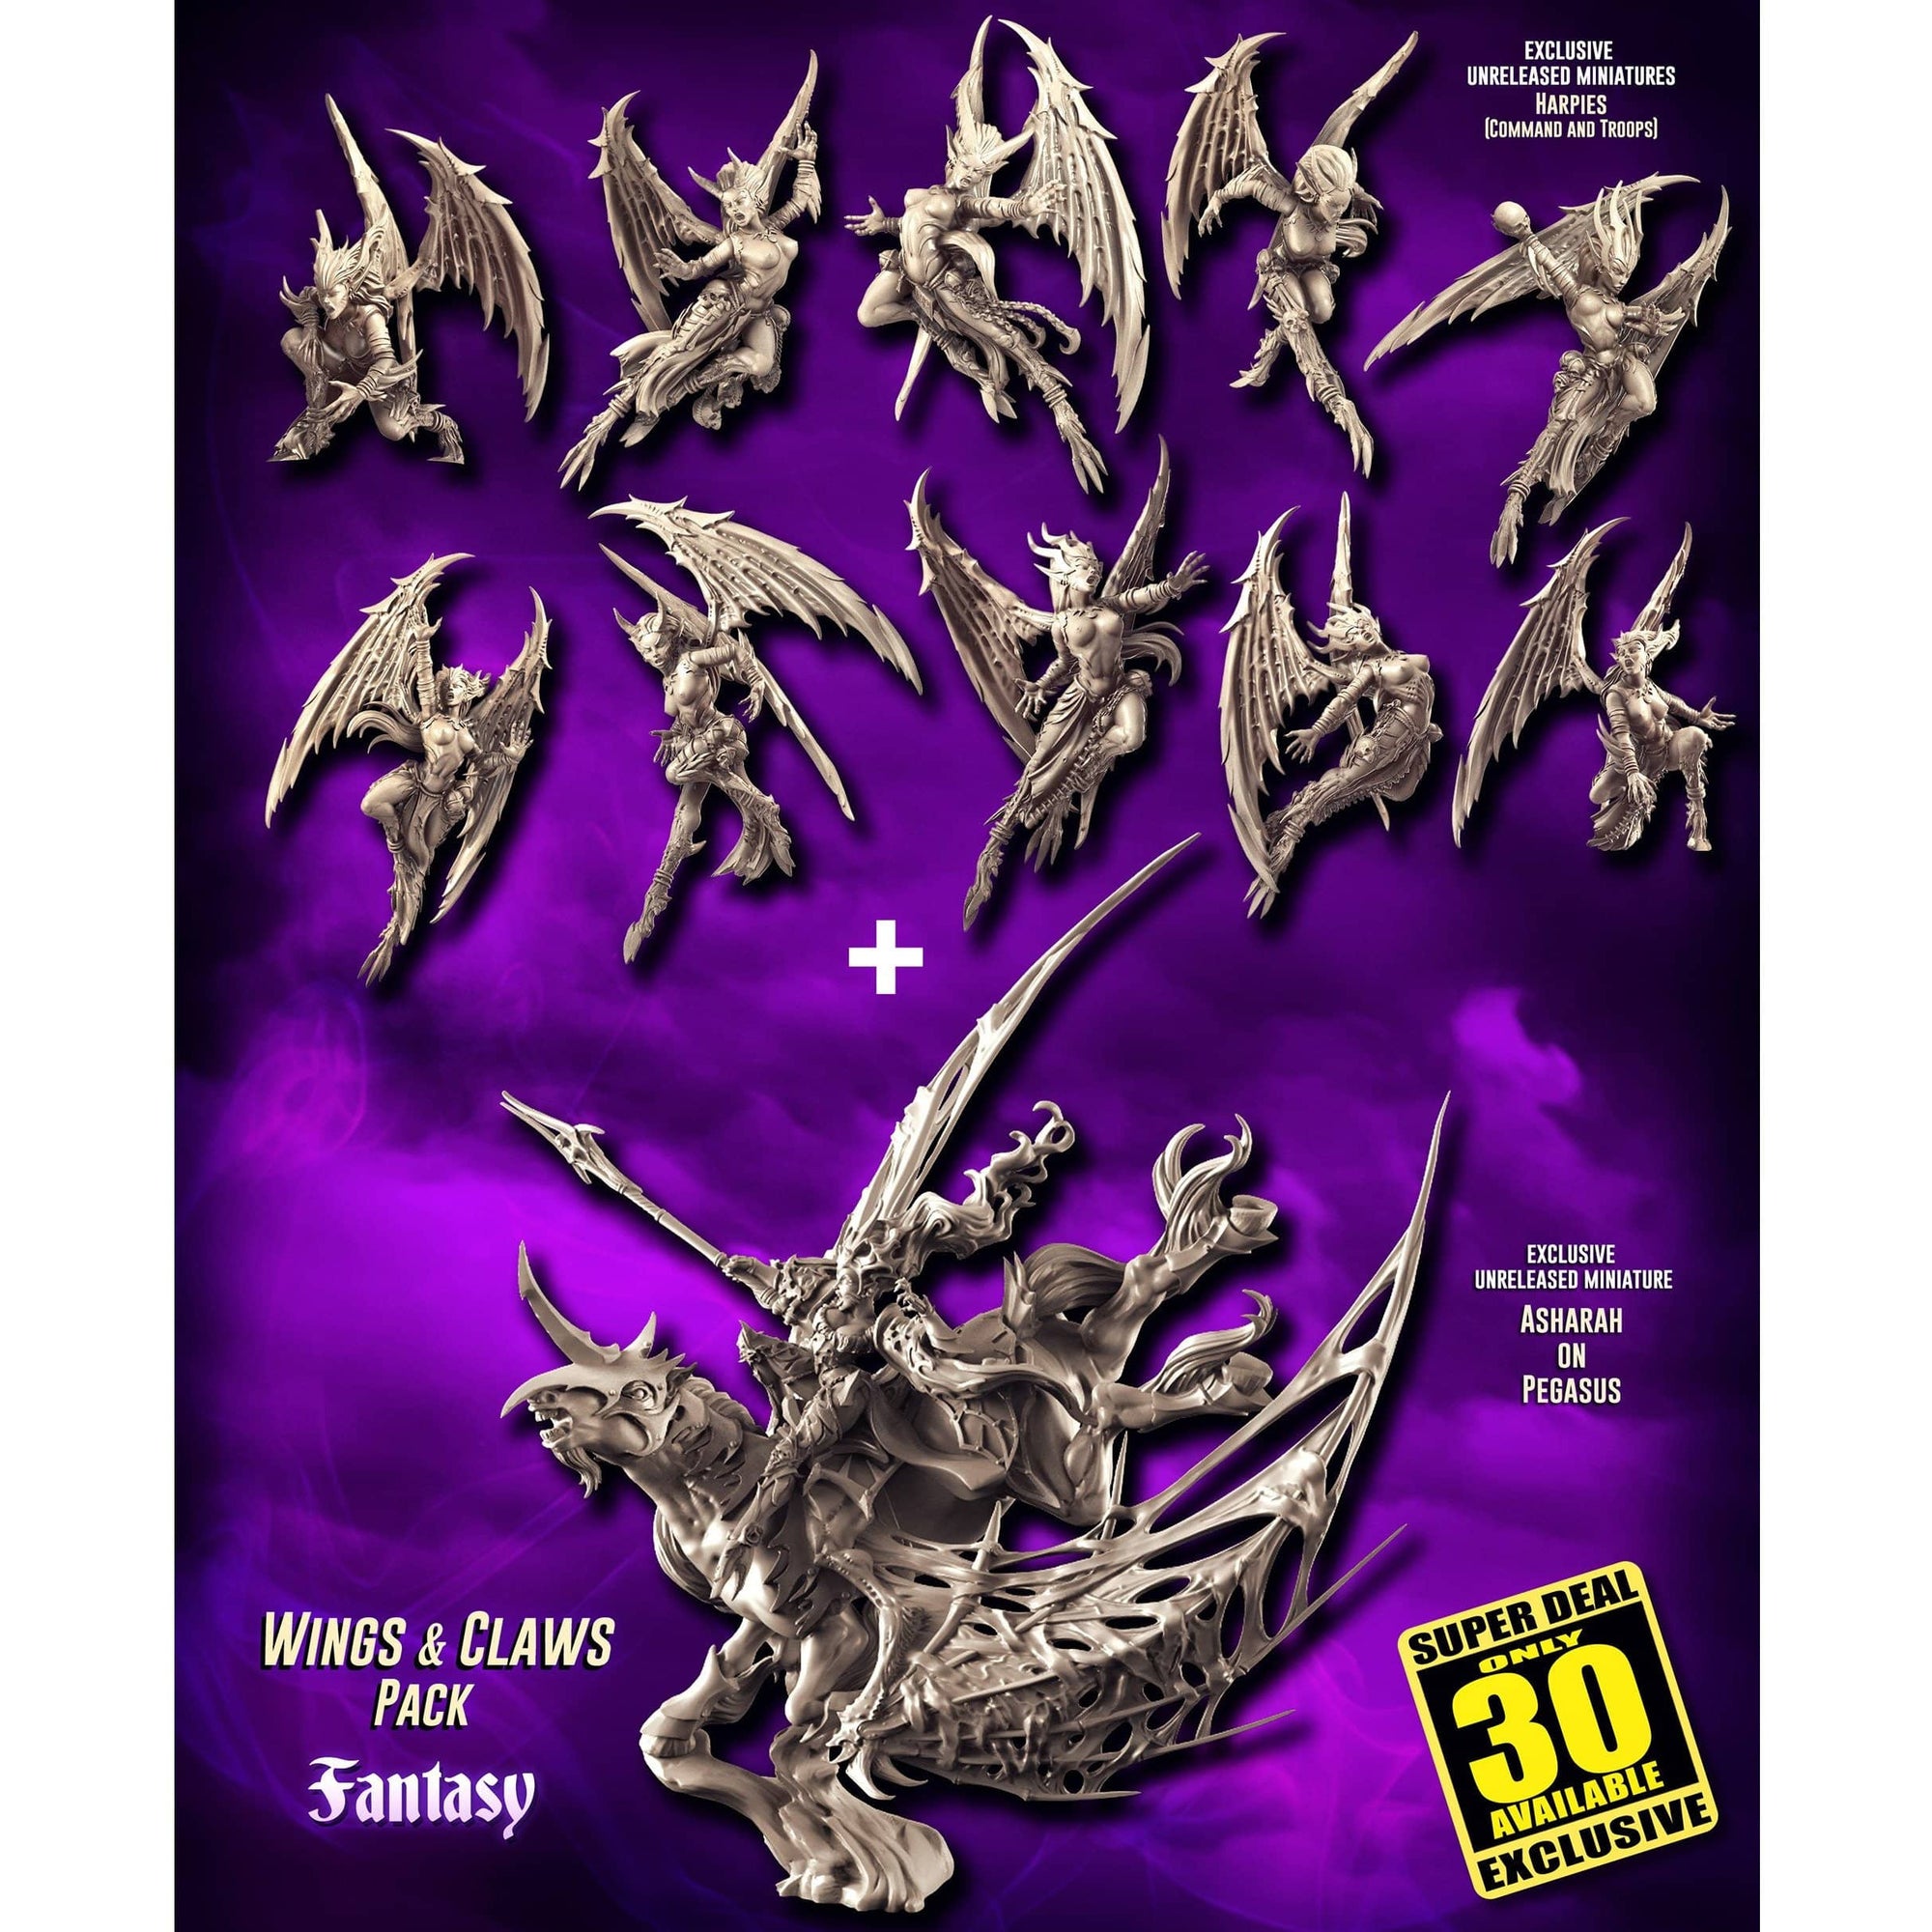 EXCLUSIVE WINGS & Claws Pack (DE - FANTASY)